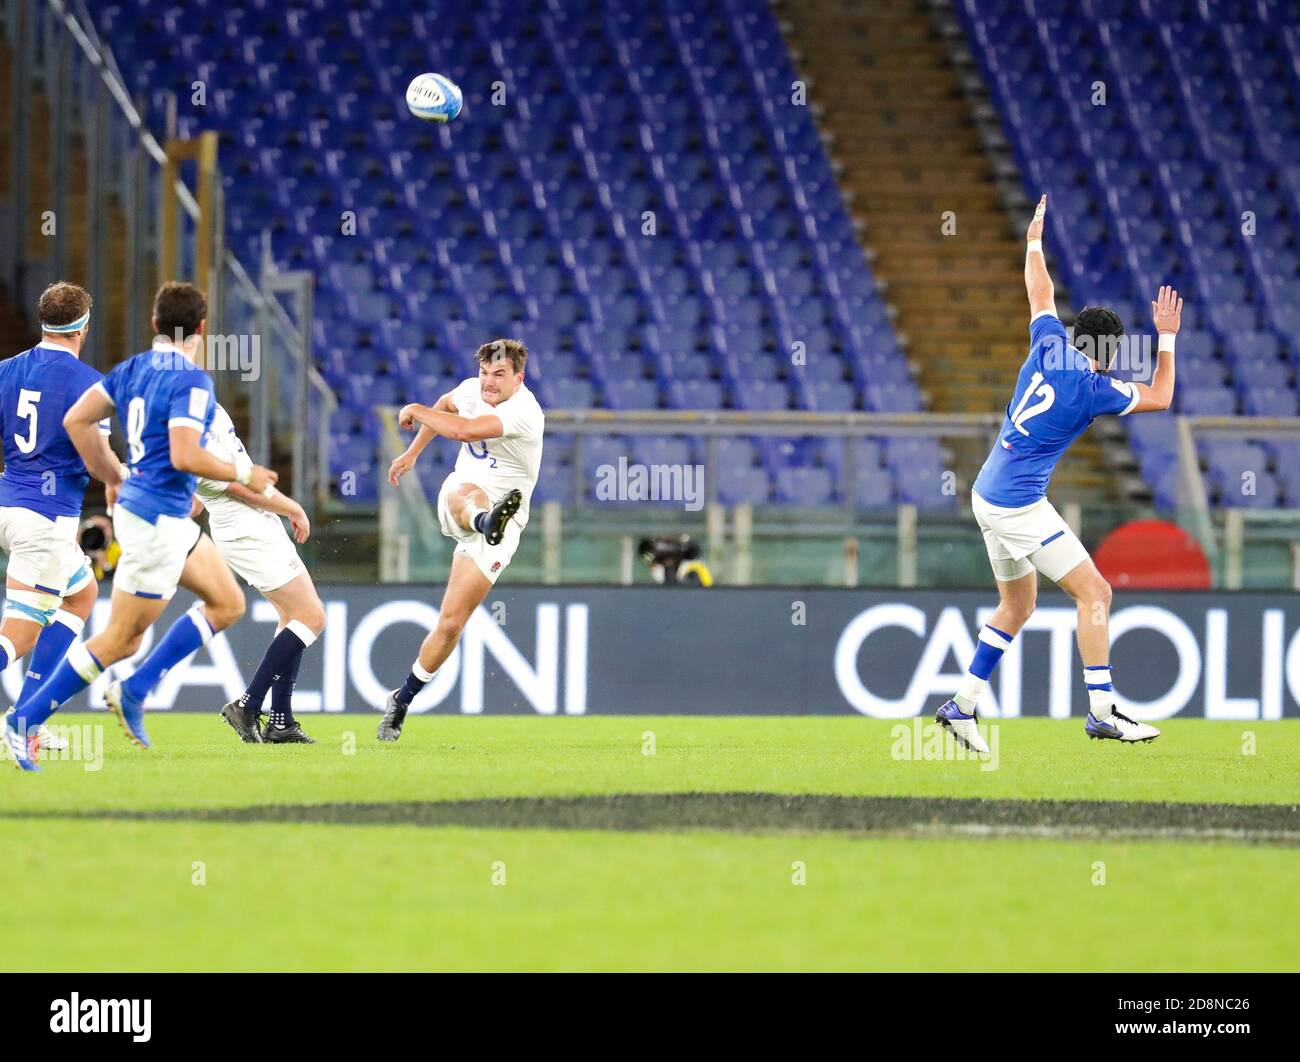 Rome, Italy. 31st Oct, 2020. rome, Italy, Stadio Olimpico, 31 Oct 2020, Owen Farrell (England) during Italy vs England - Rugby Six Nations match - Credit: LM/Luigi Mariani Credit: Luigi Mariani/LPS/ZUMA Wire/Alamy Live News Stock Photo